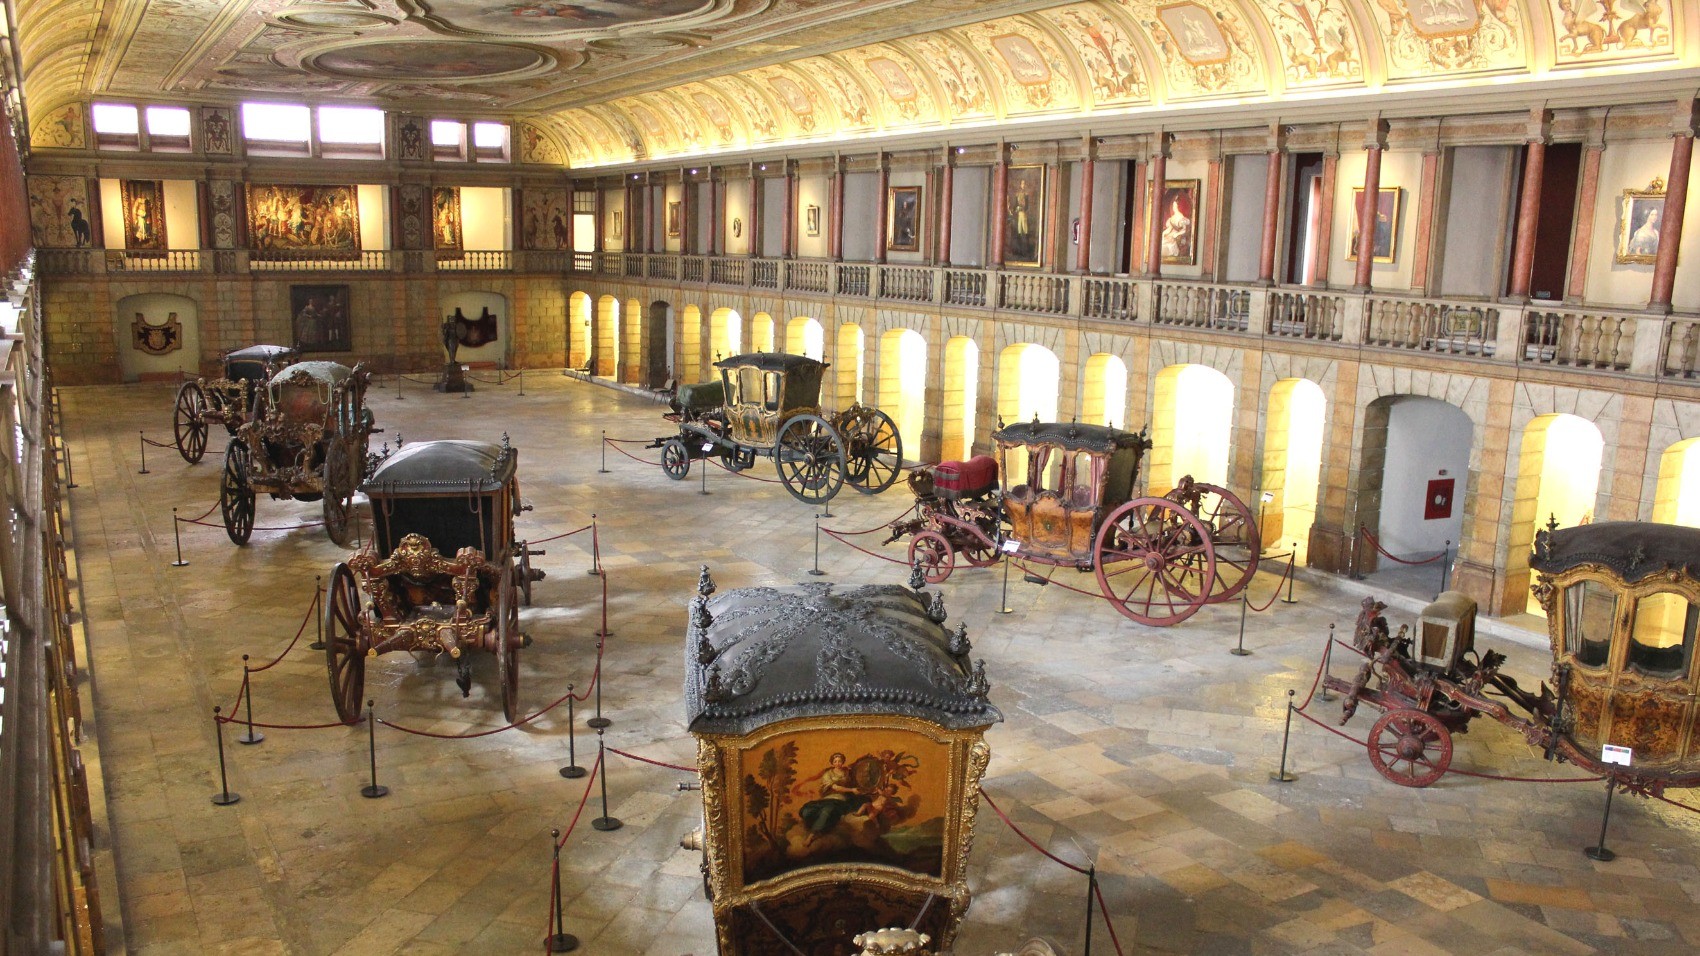 Lisbon-&-Surroungings-for-Wine-Lovers-coach-museum-CREDIT-Pedro-Beltrão-DGPC-Museu-dos-Coches